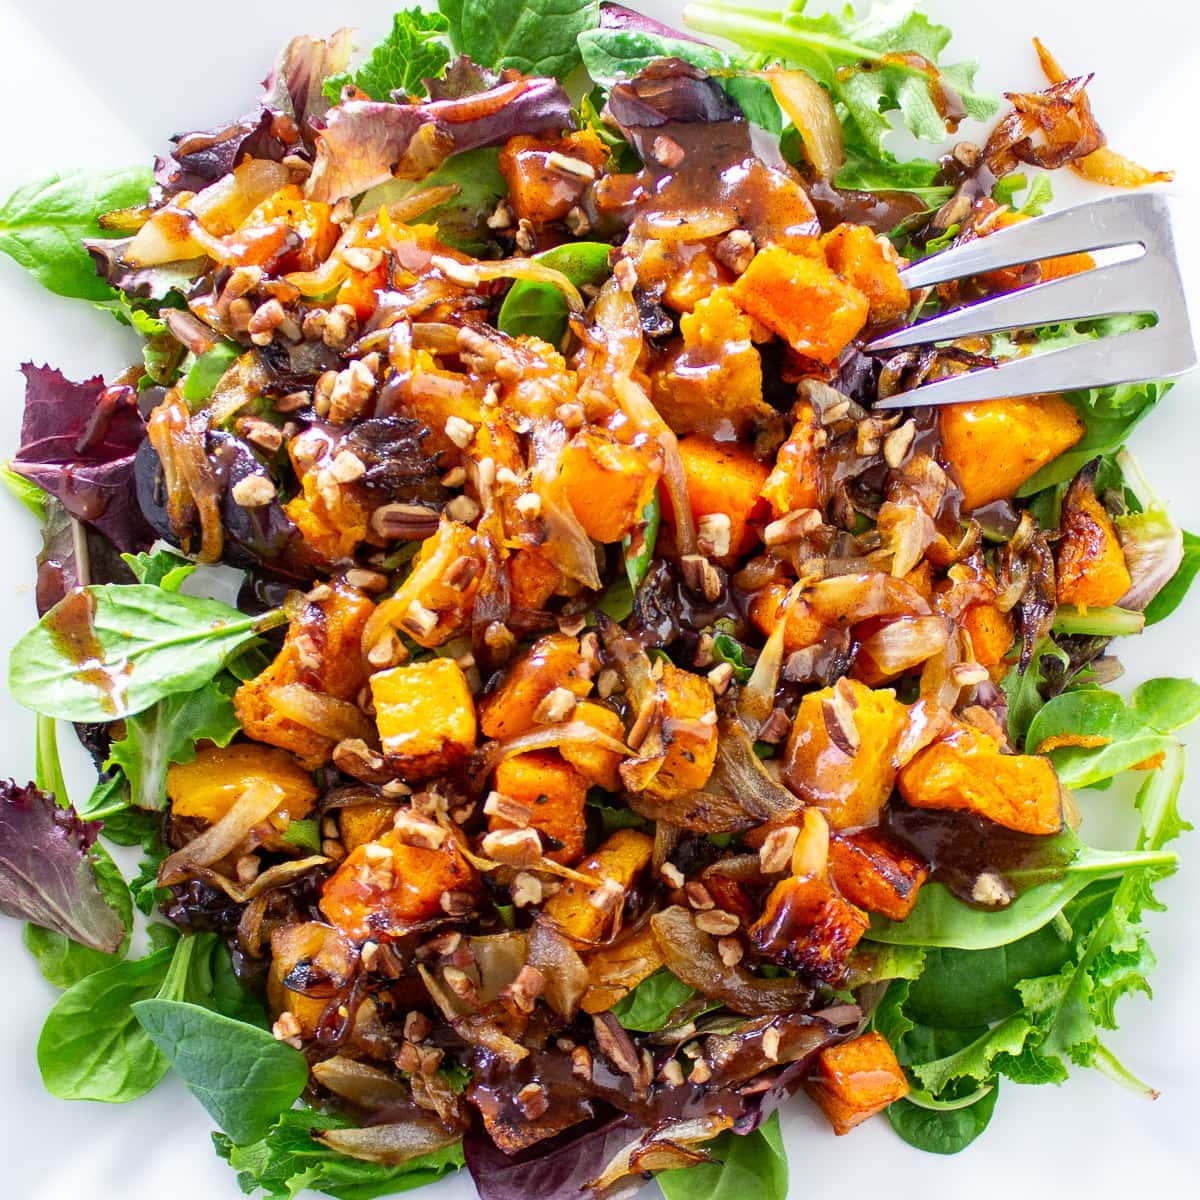 butternut squash salad with cinnamon dressing on plate